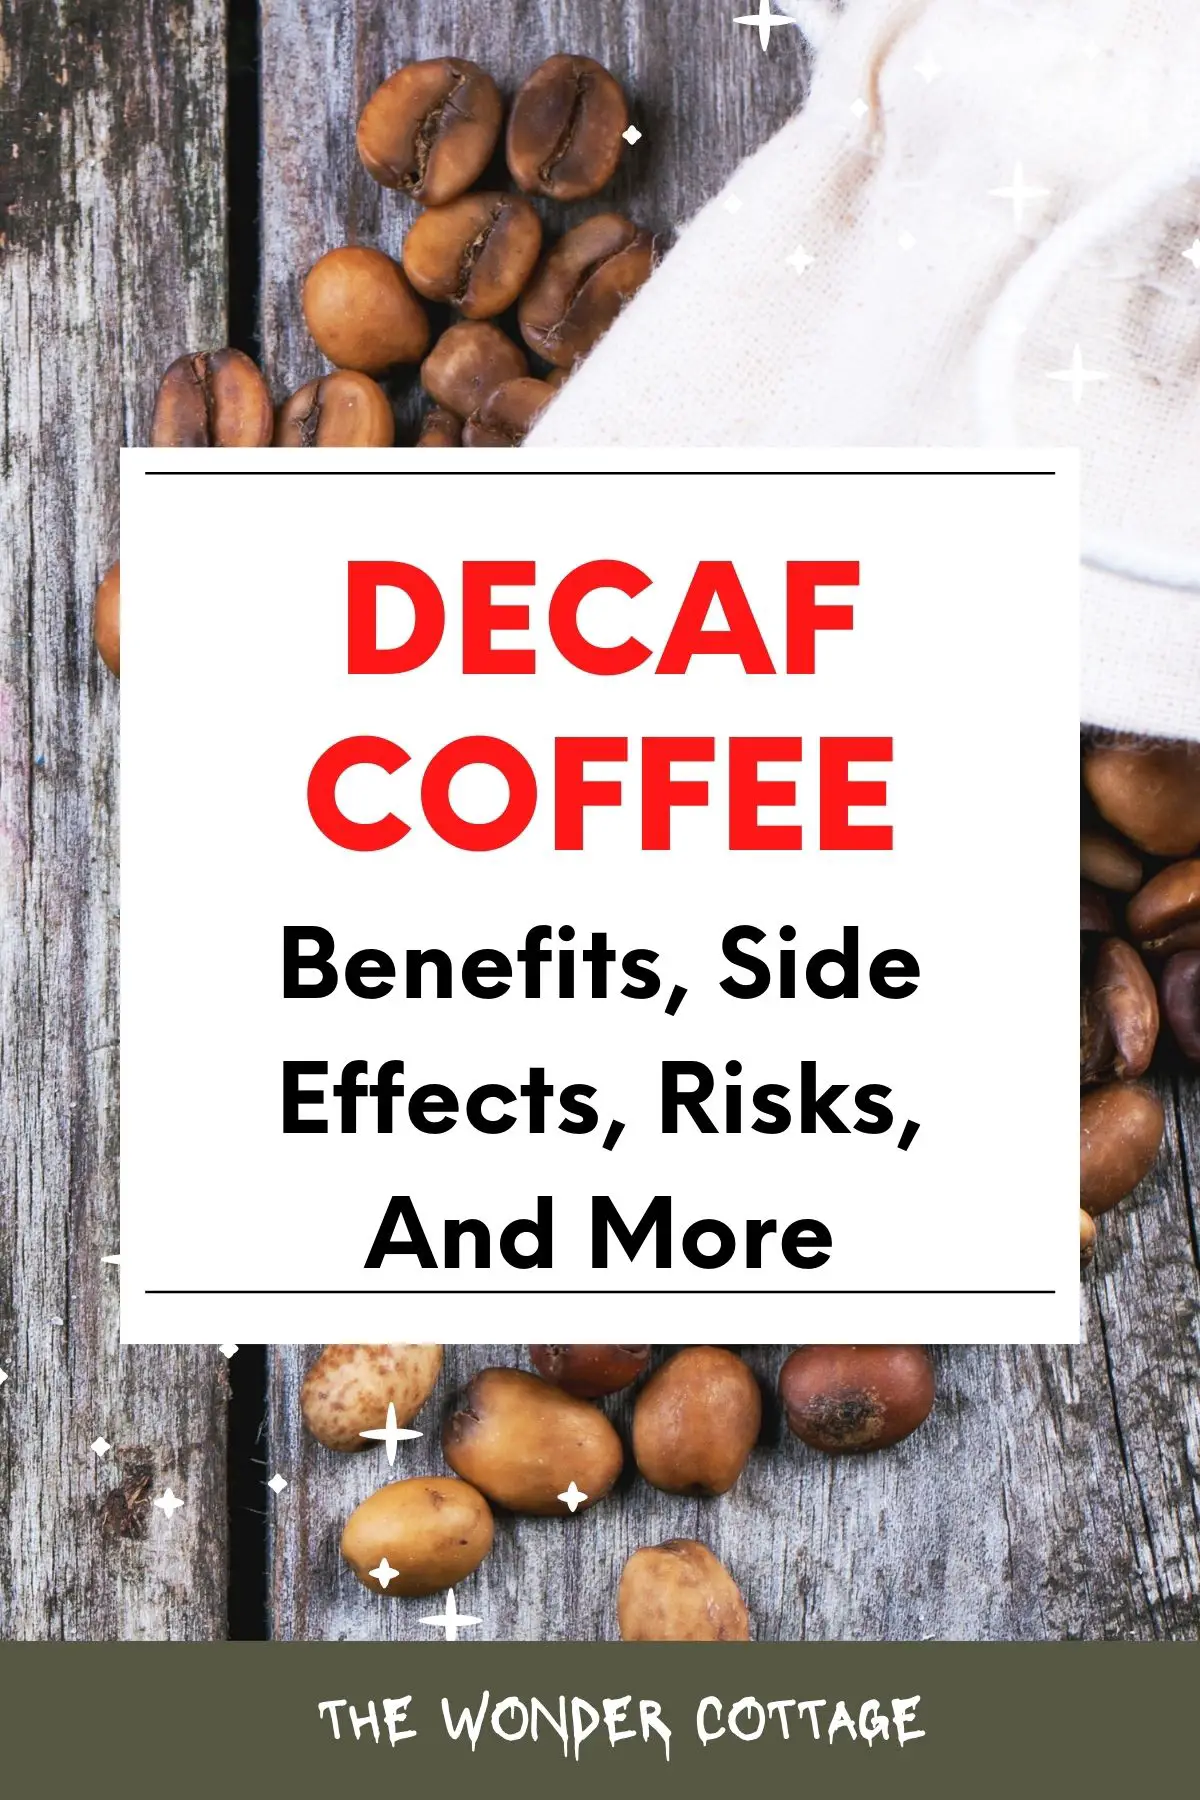 Decaf Coffee: Benefits, Side Effects, Risks, And More